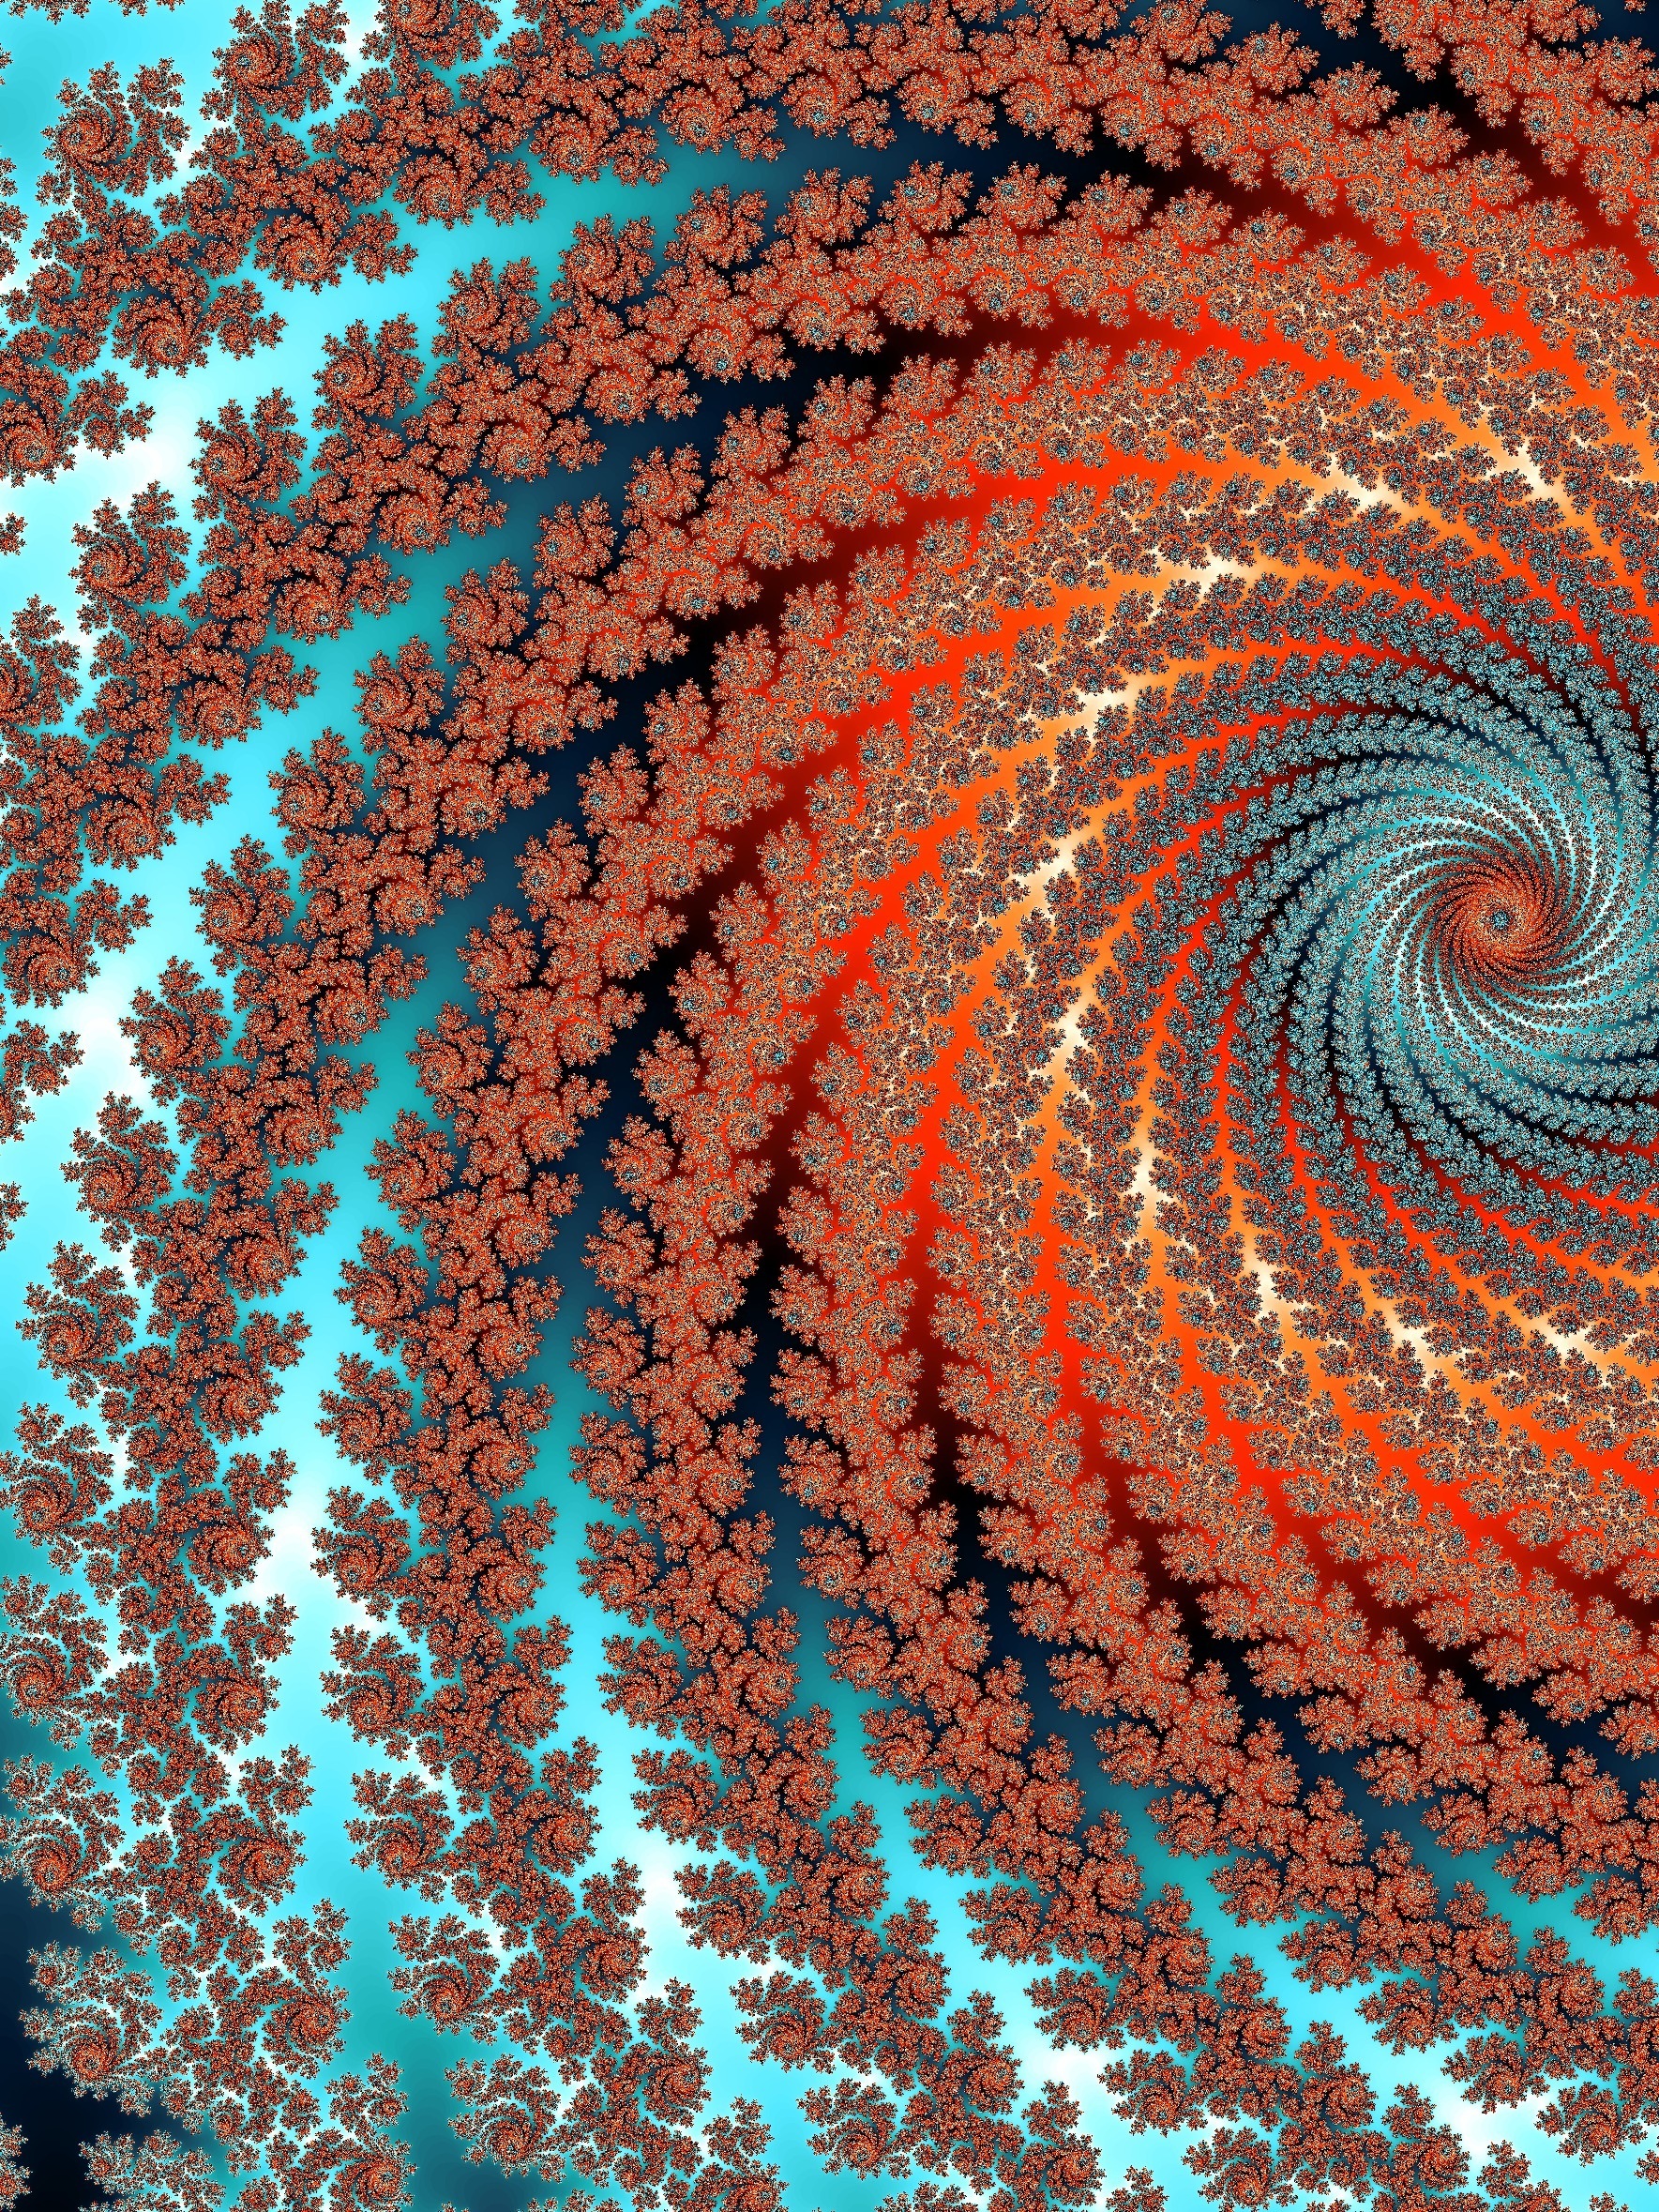 fractal, involute, digital, motley, swirling, abstract, multicolored, funnel